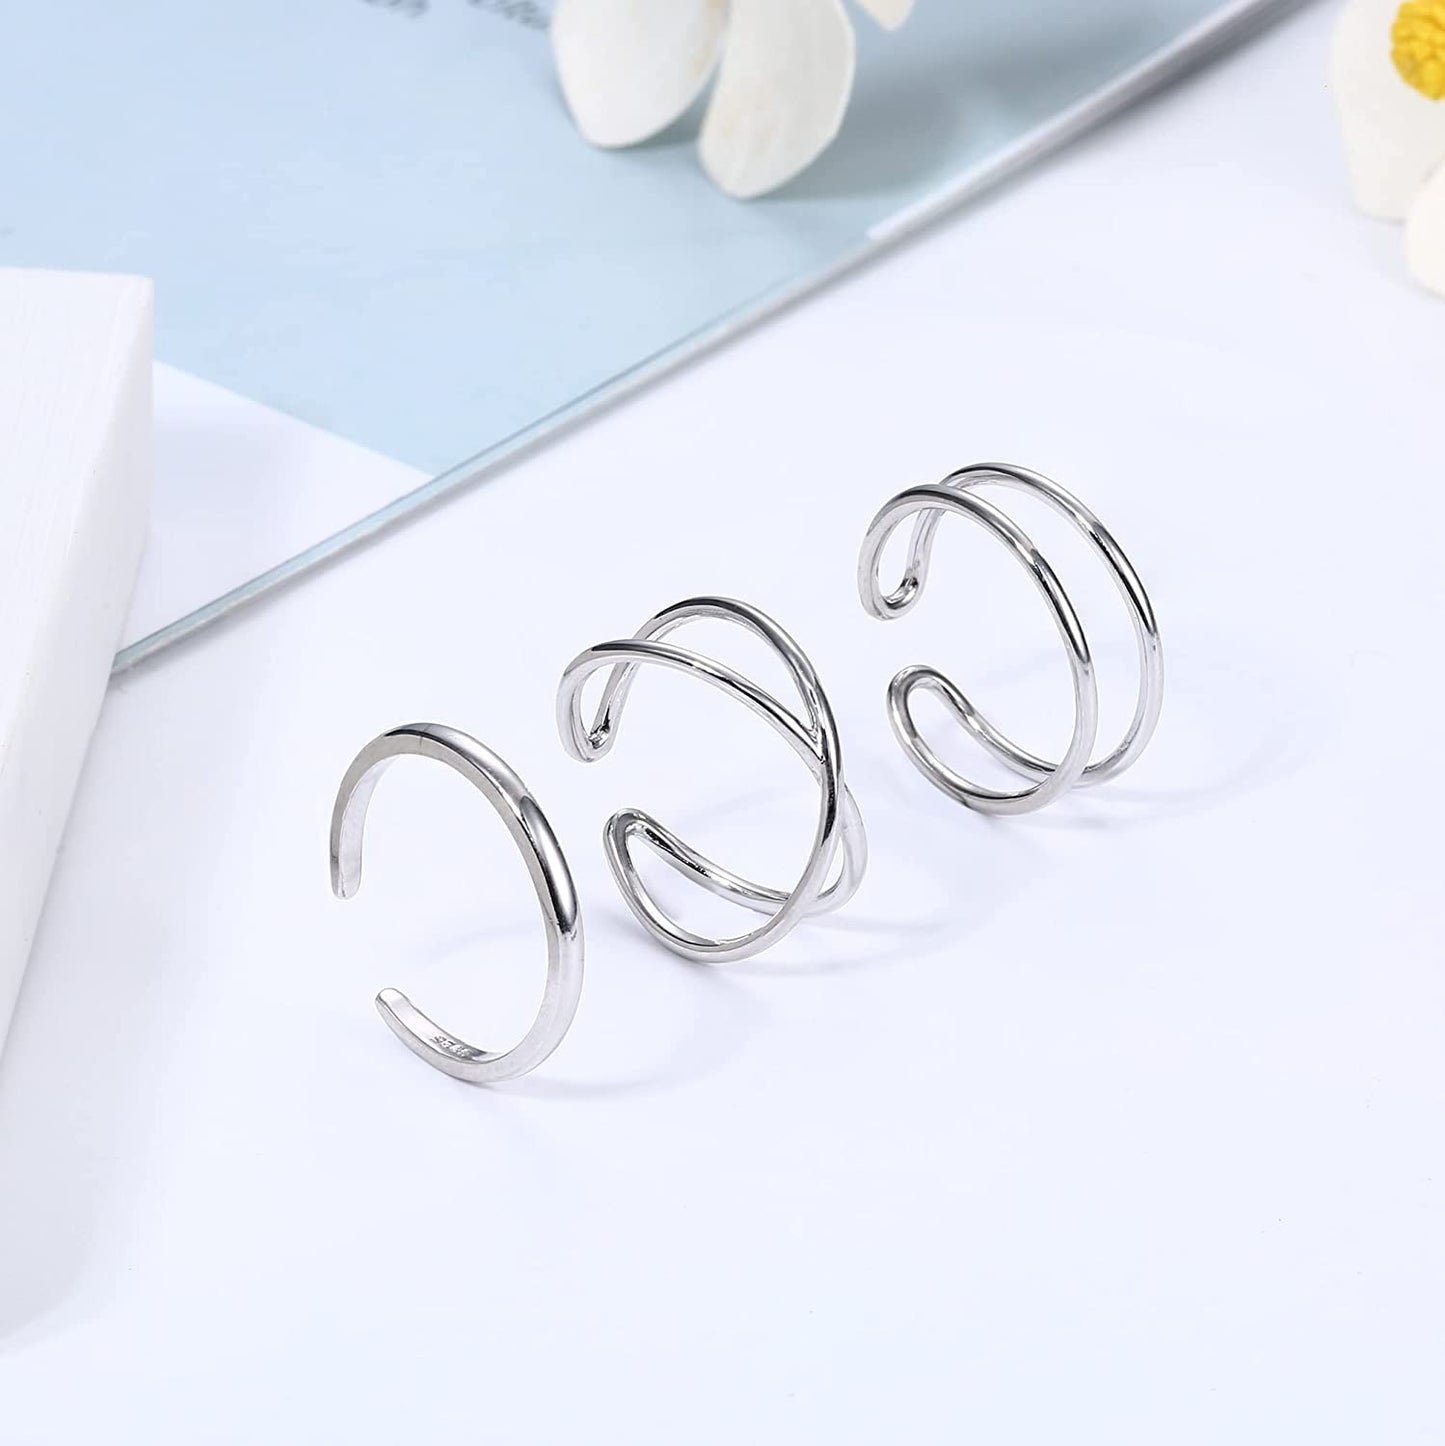 3Pcs 925 Sterling Silver Open Adjustable Rings for Women Men Stackable Cross Arrow Heart Moon&Star Paperclip Rings Hypoallergenic Thumb Knuckle Simple Ring Set Size 6-9